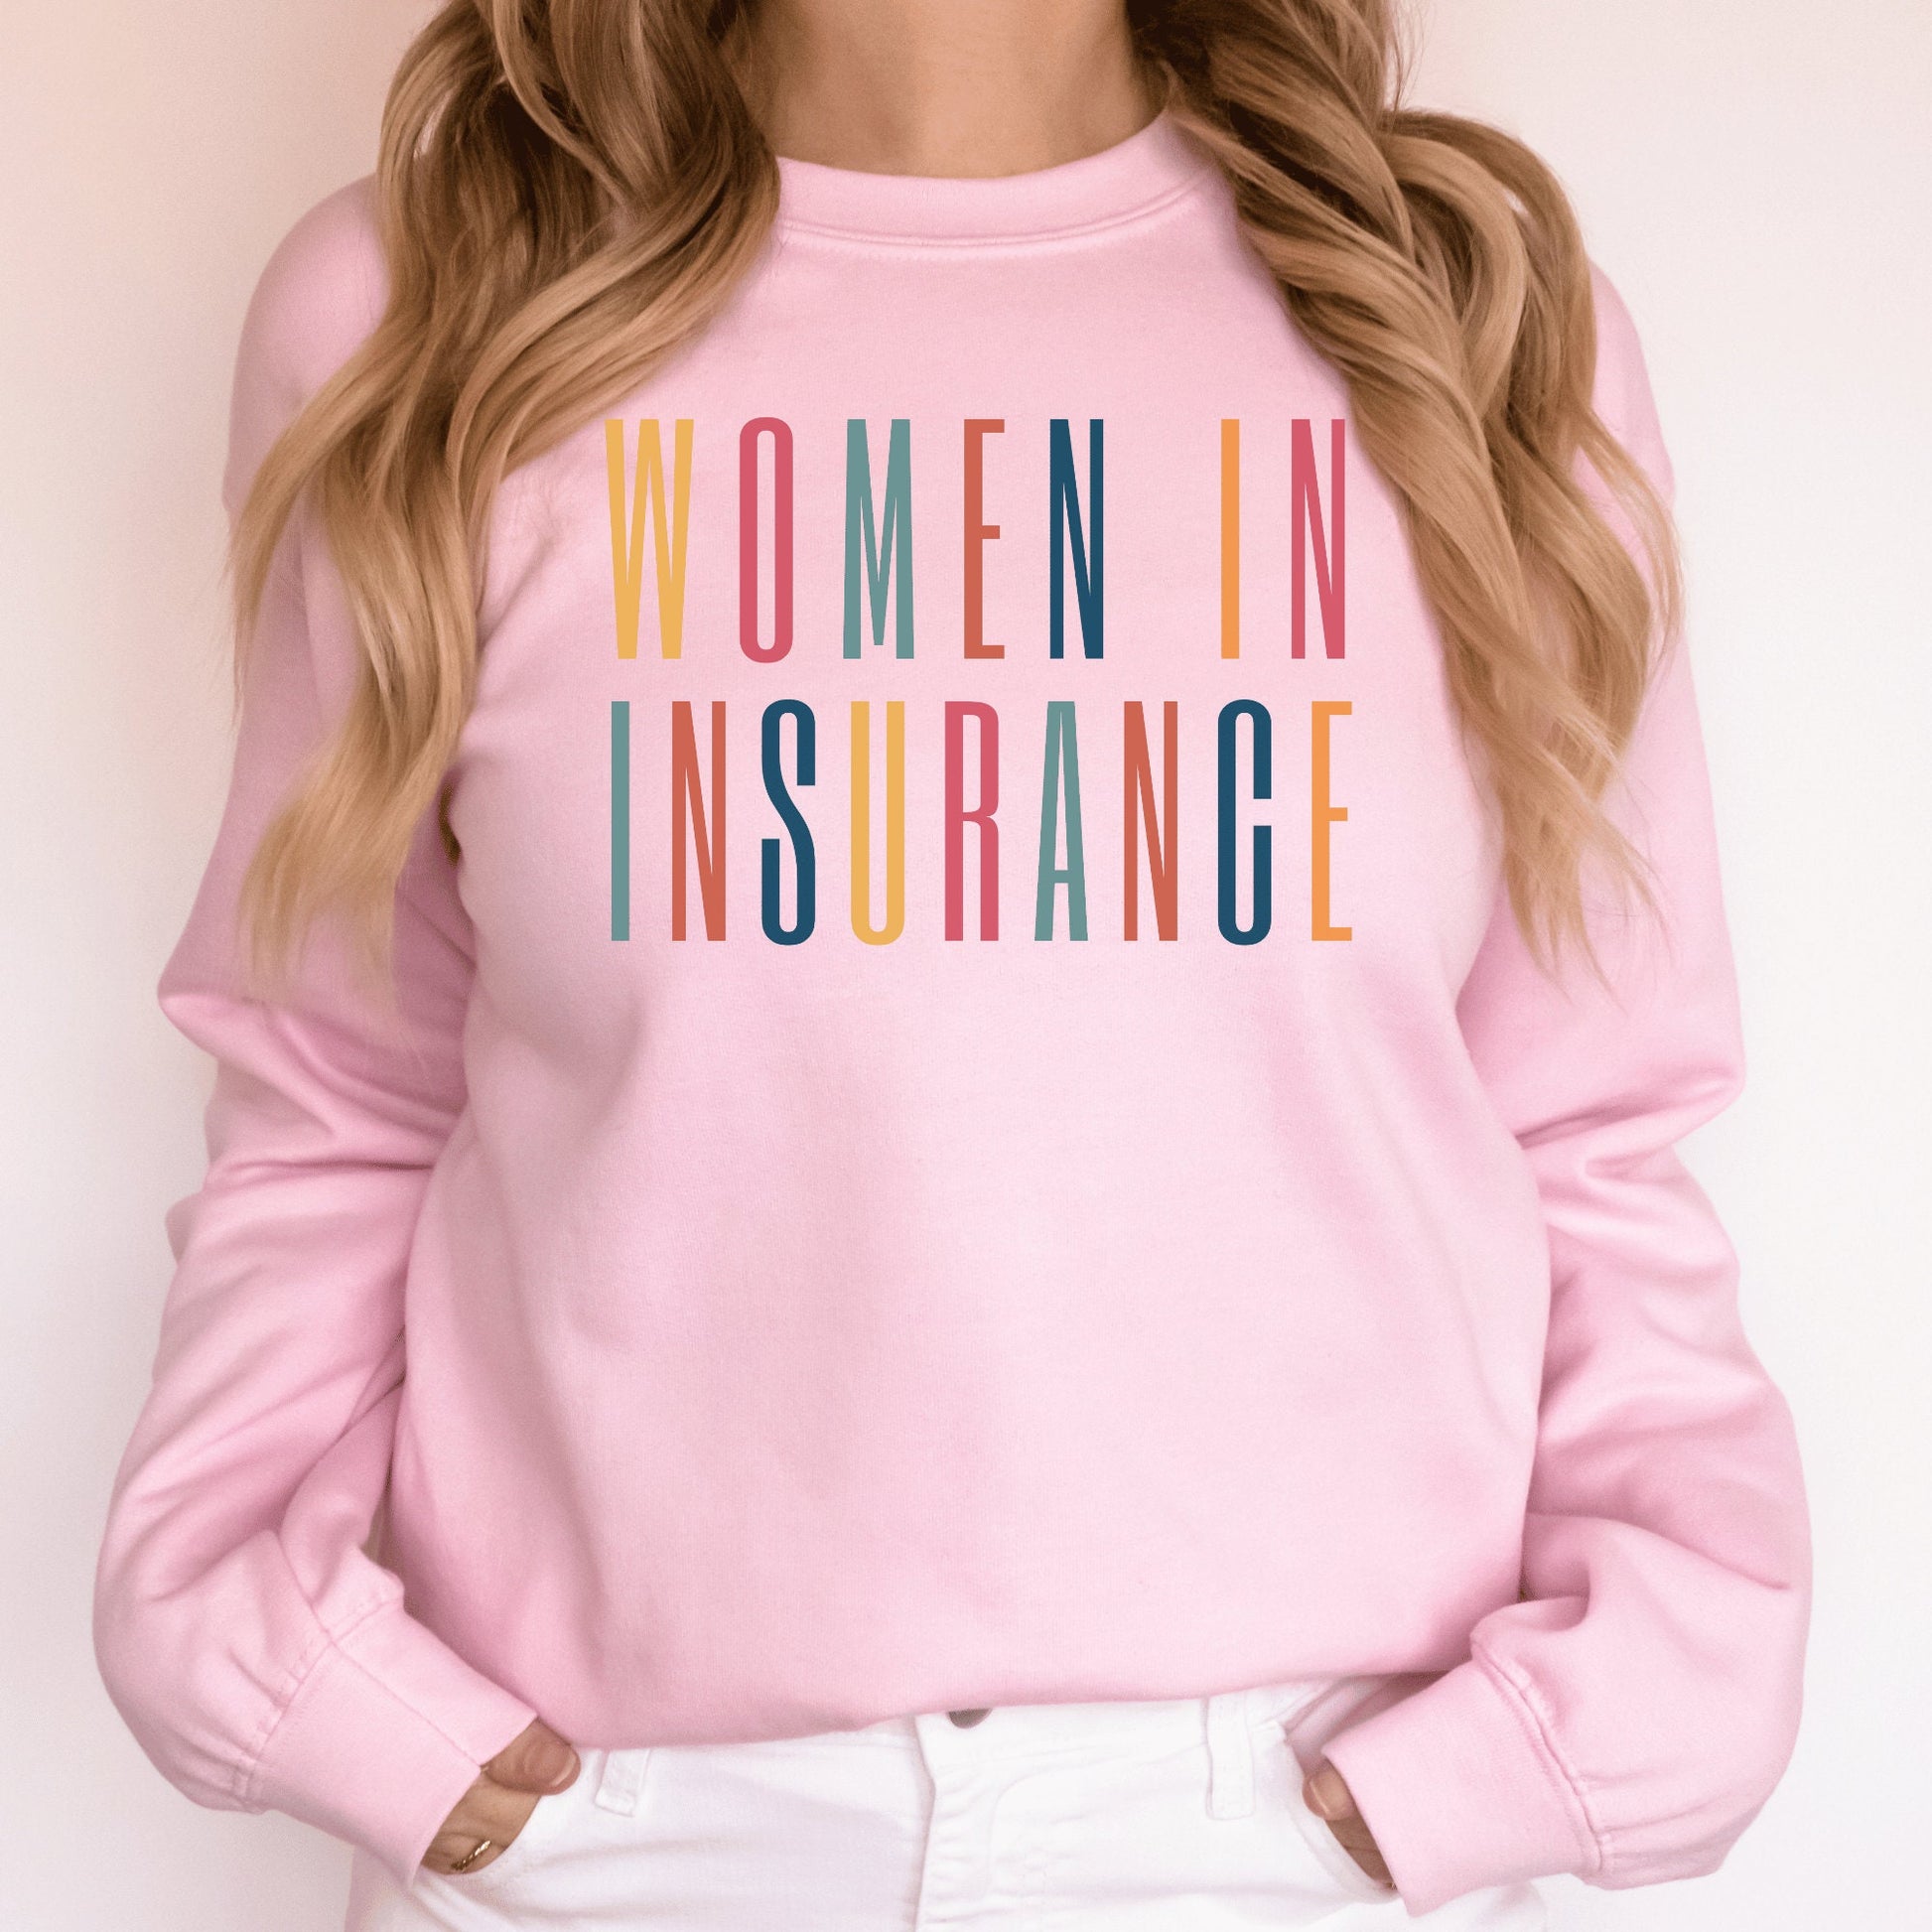 pink unisex sweatshirt that says "women in insurance" in all capital, multicolored letters and makes the perfect gift for an insurance agent